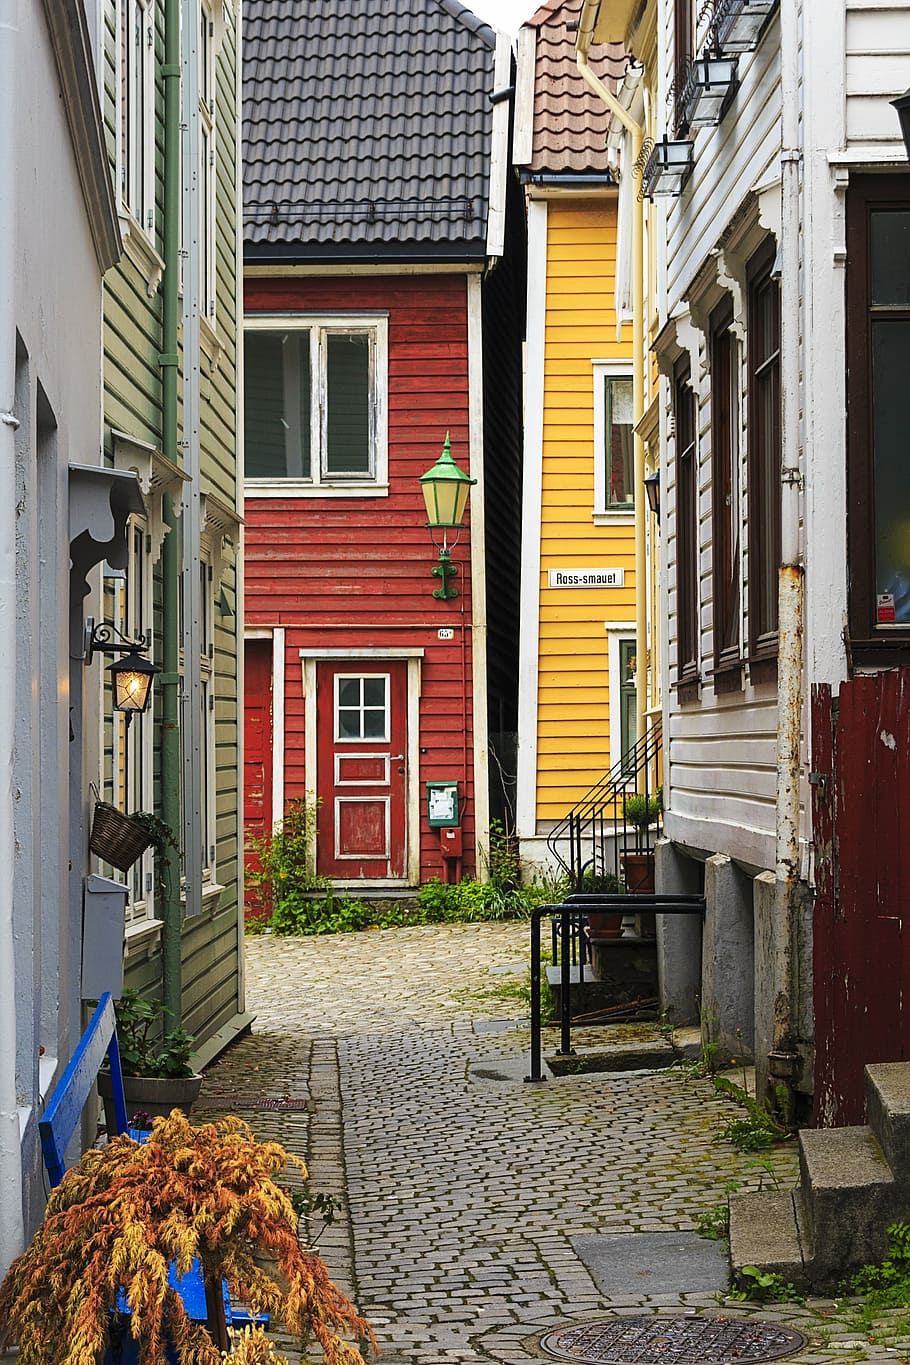 bergen, norway, travel, europe, architecture, house, tourism